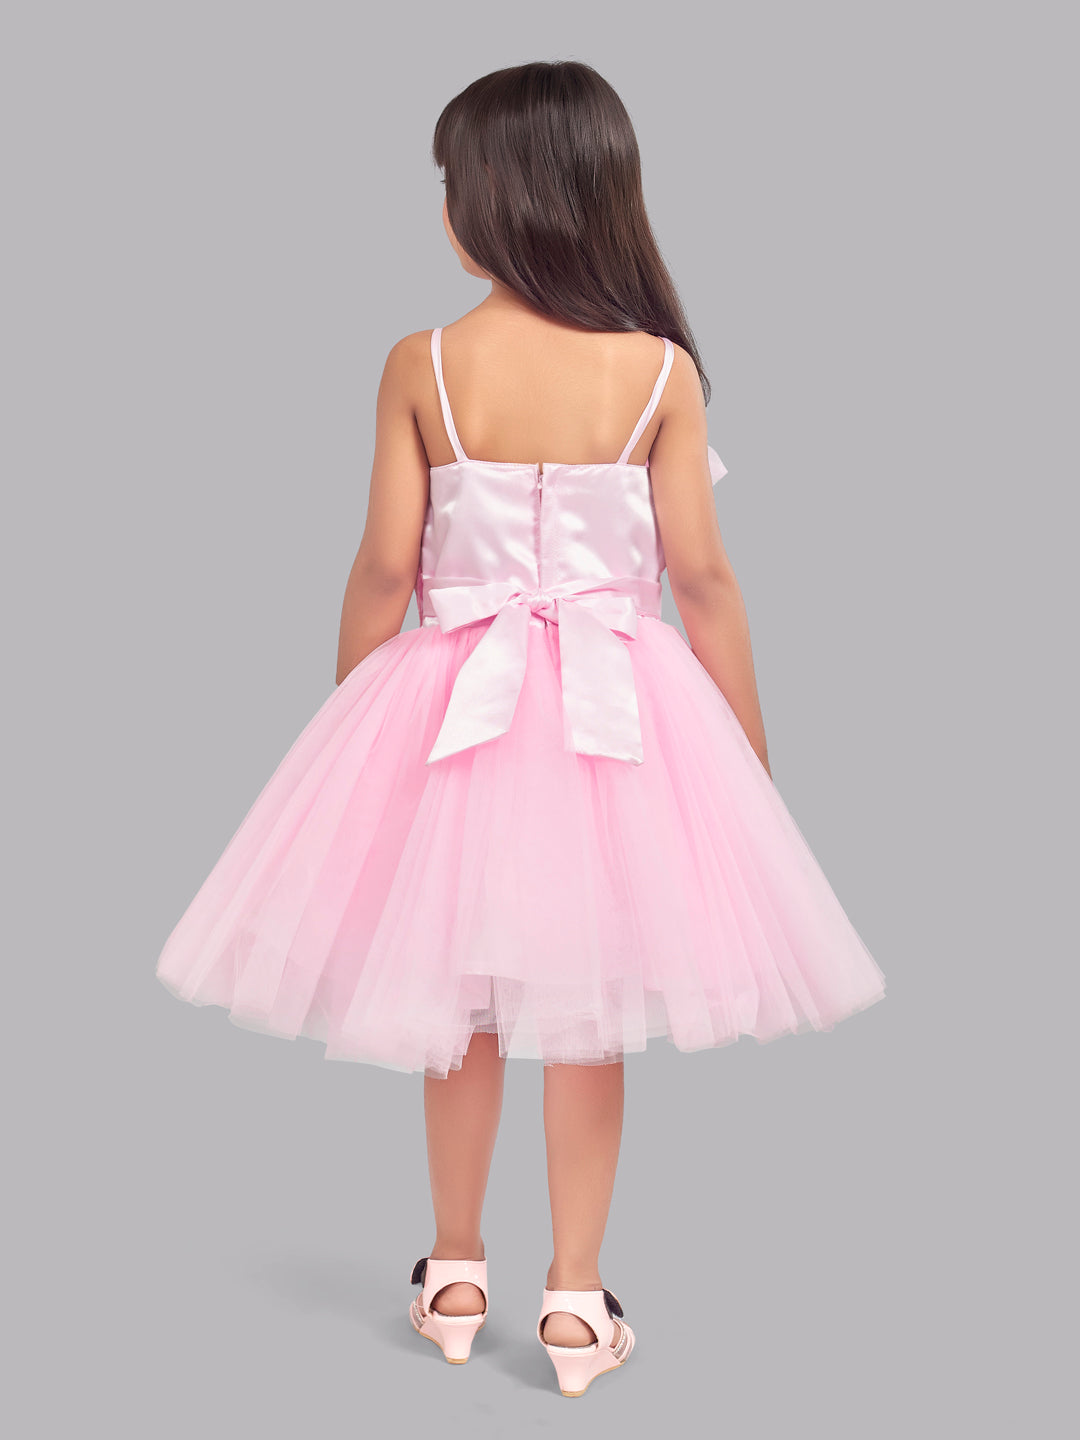 Ruffled Silhouette Party Dress -Pink